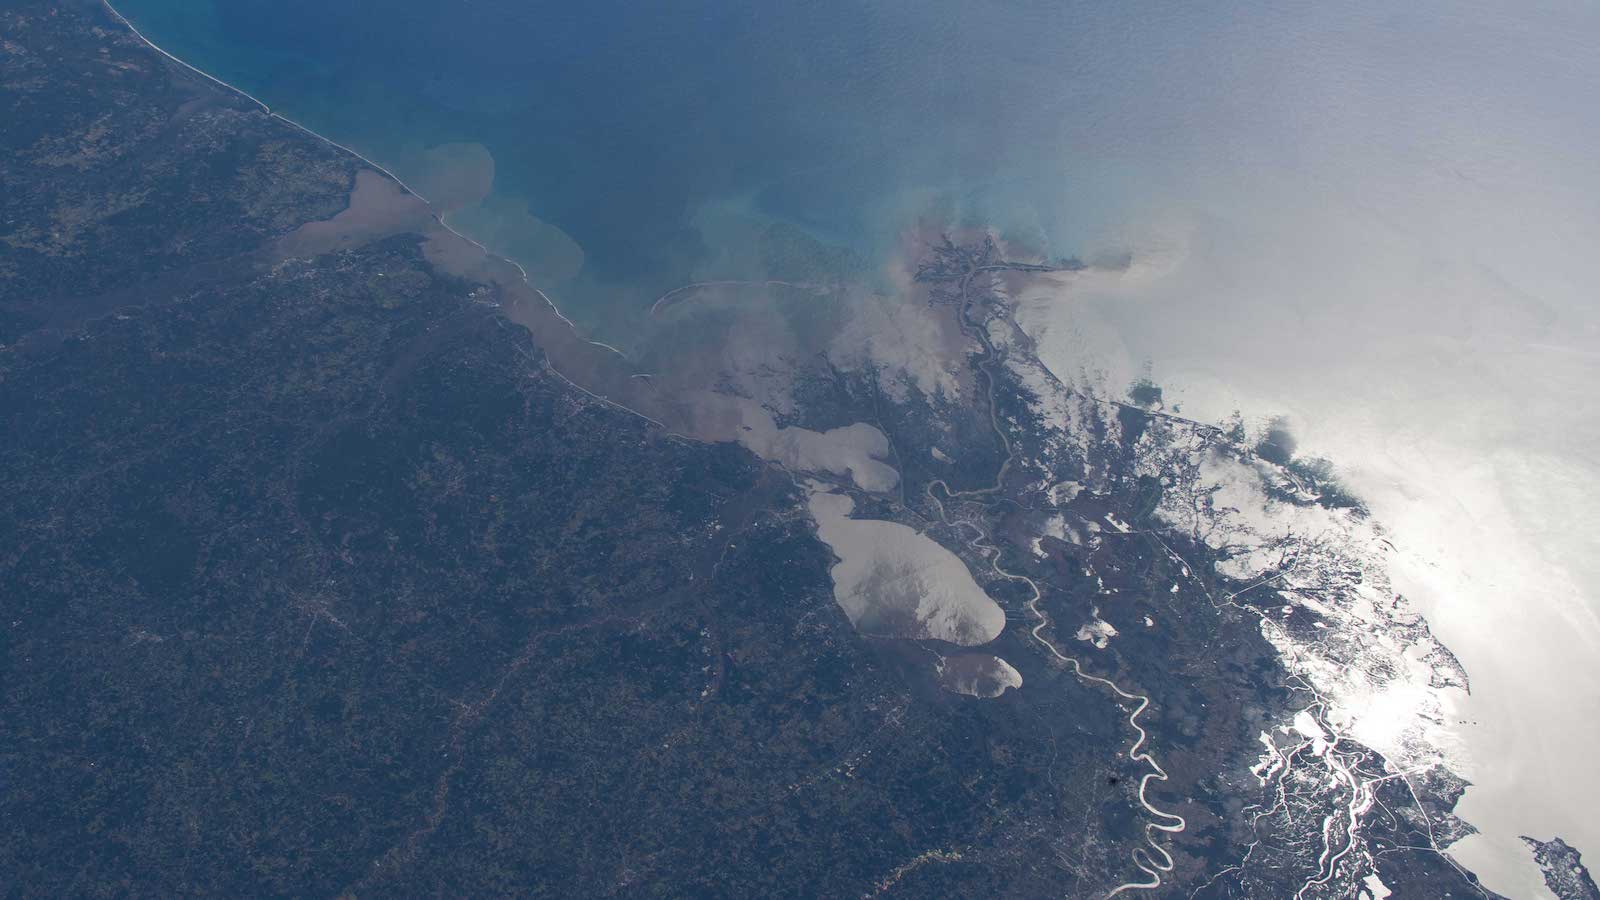 slide 1 - NASA Uses 30-Year Satellite Record to Track and Project Rising Seas